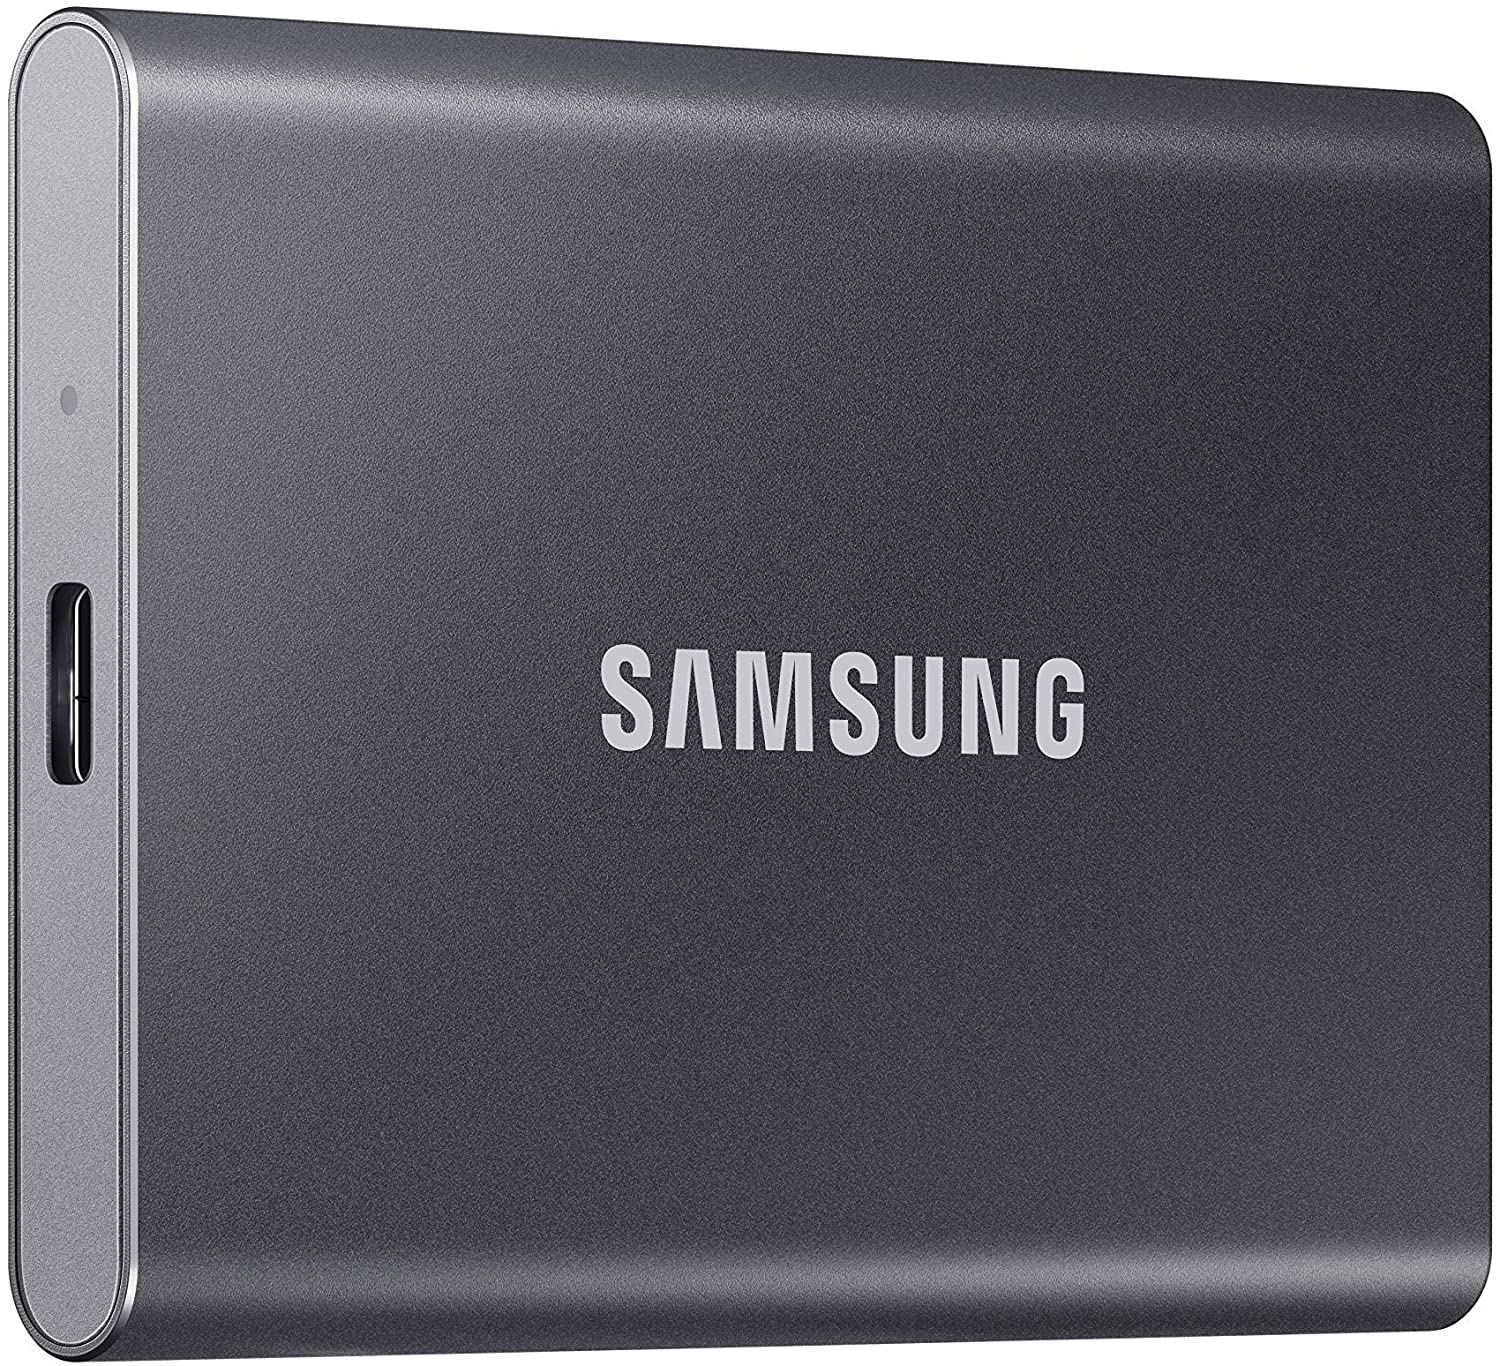 The Samsung T7 Portable SSD